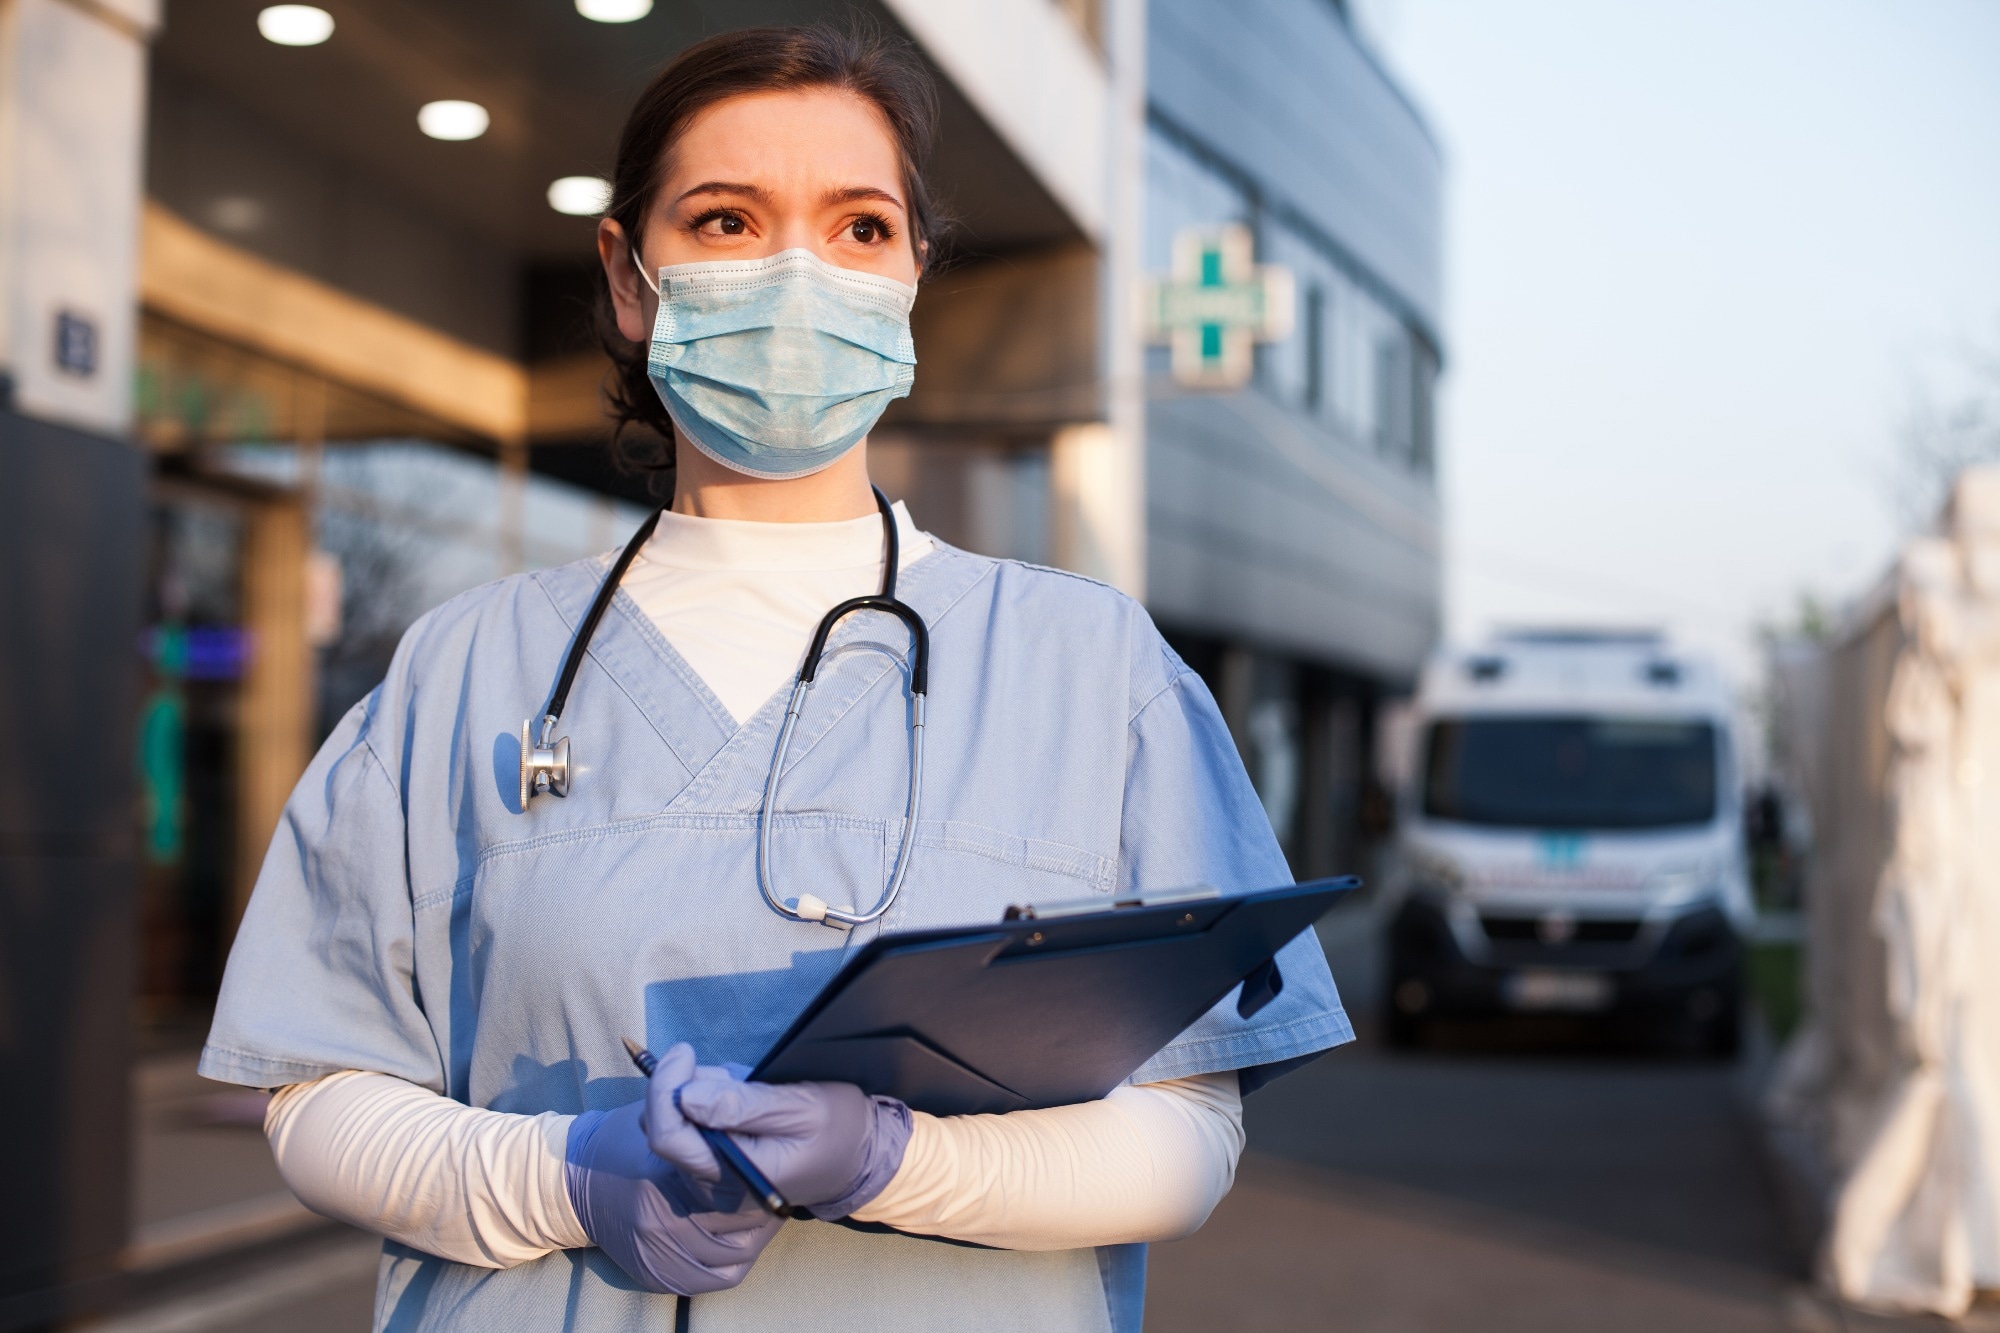 Study: Effect of serious infectious threat response initiative (SITRI) during the coronavirus disease 2019 (COVID-19) pandemic at the Veterans Affairs North Texas Health Care System. Image Credit: Cryptographer/Shutterstock.com